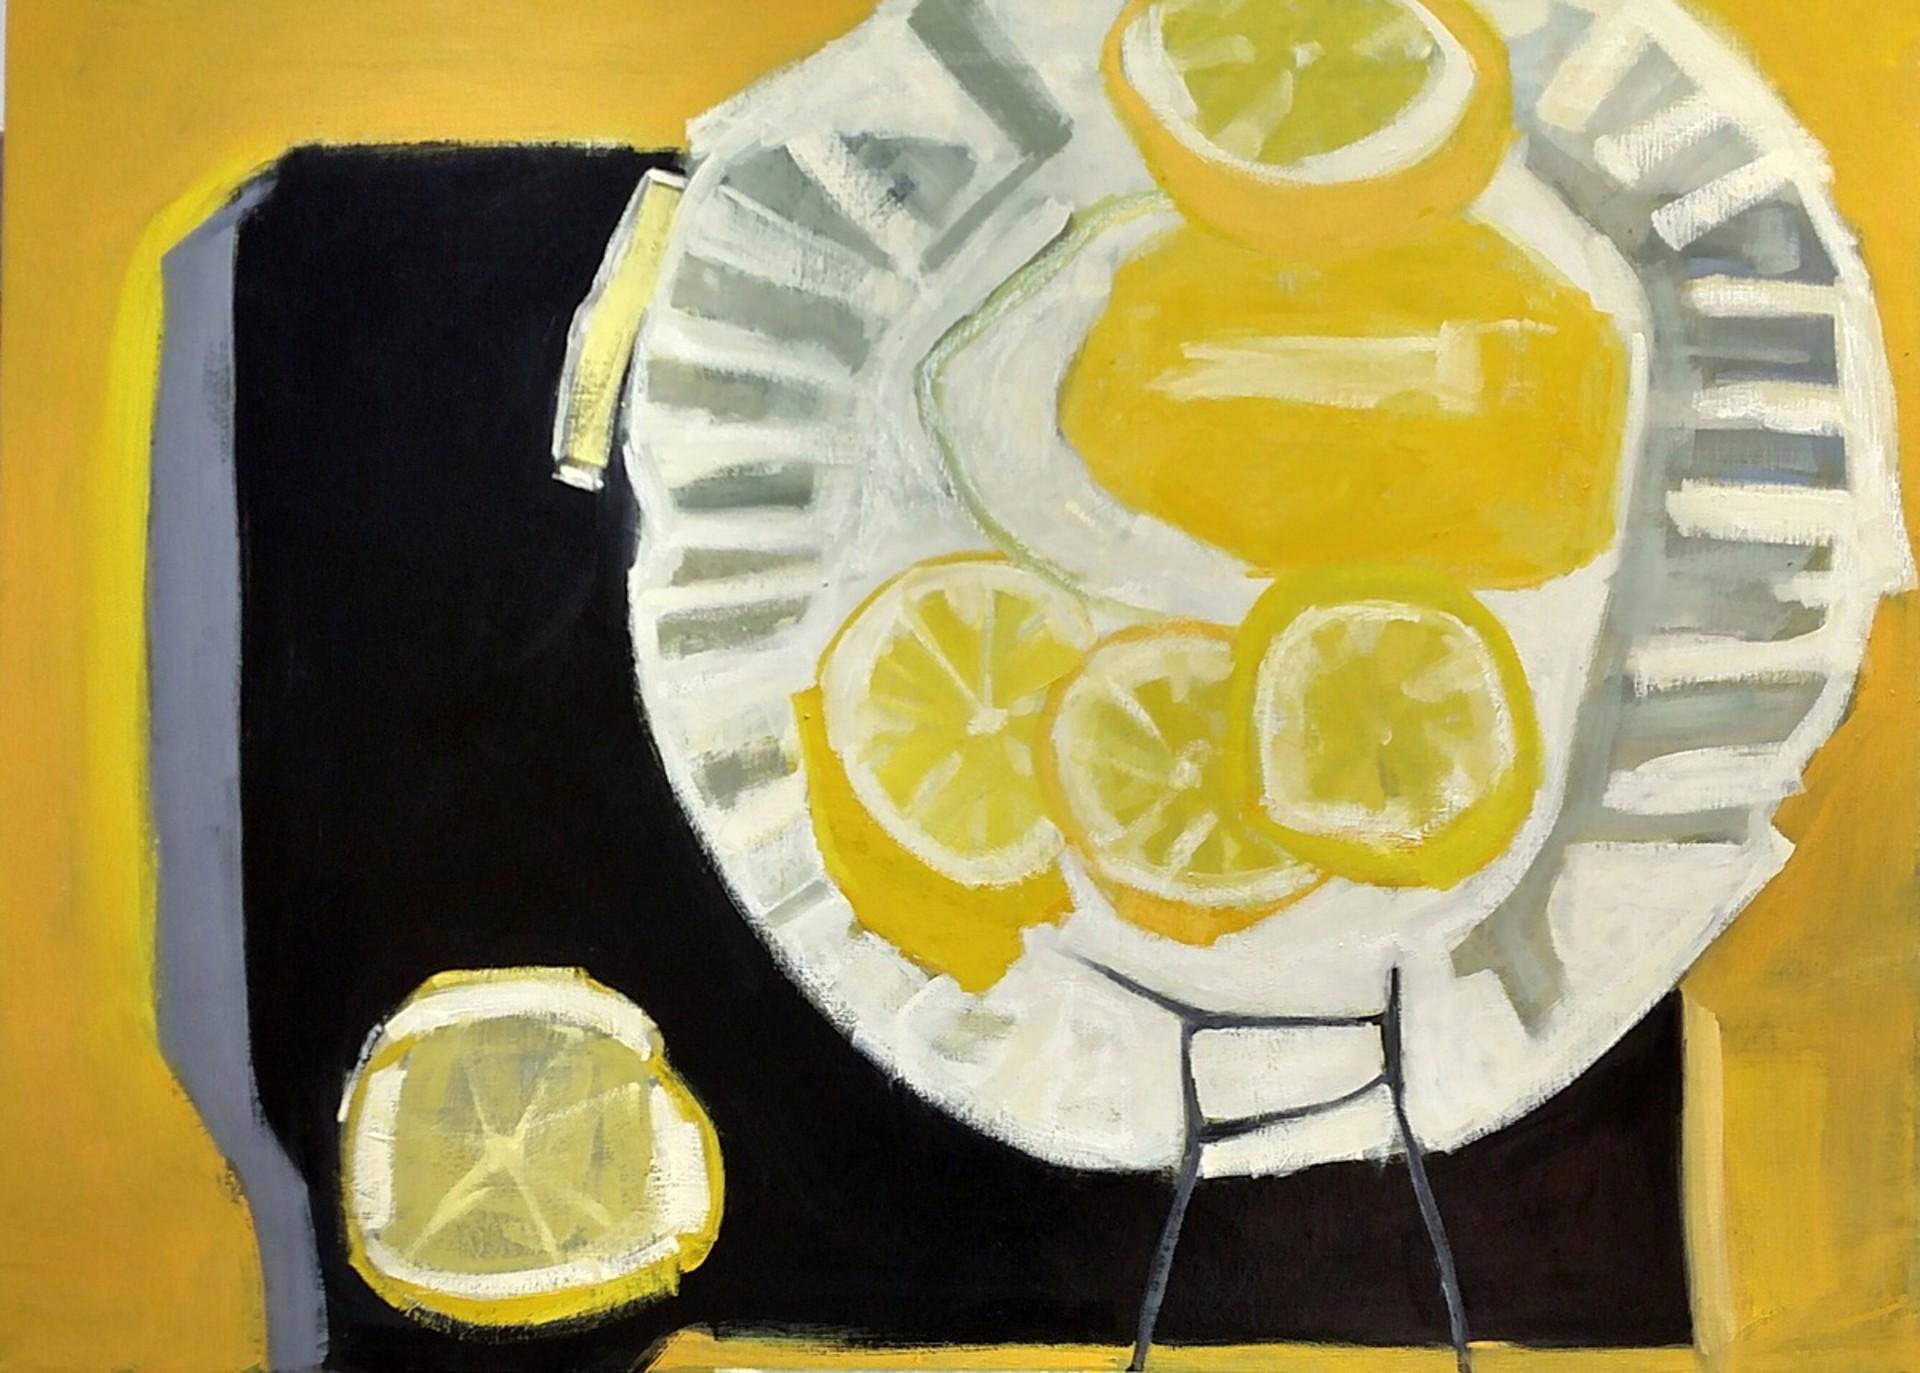 Big Lemon - Vibrant Contemporary Still Life, Oil Painting on Canvas in Frame